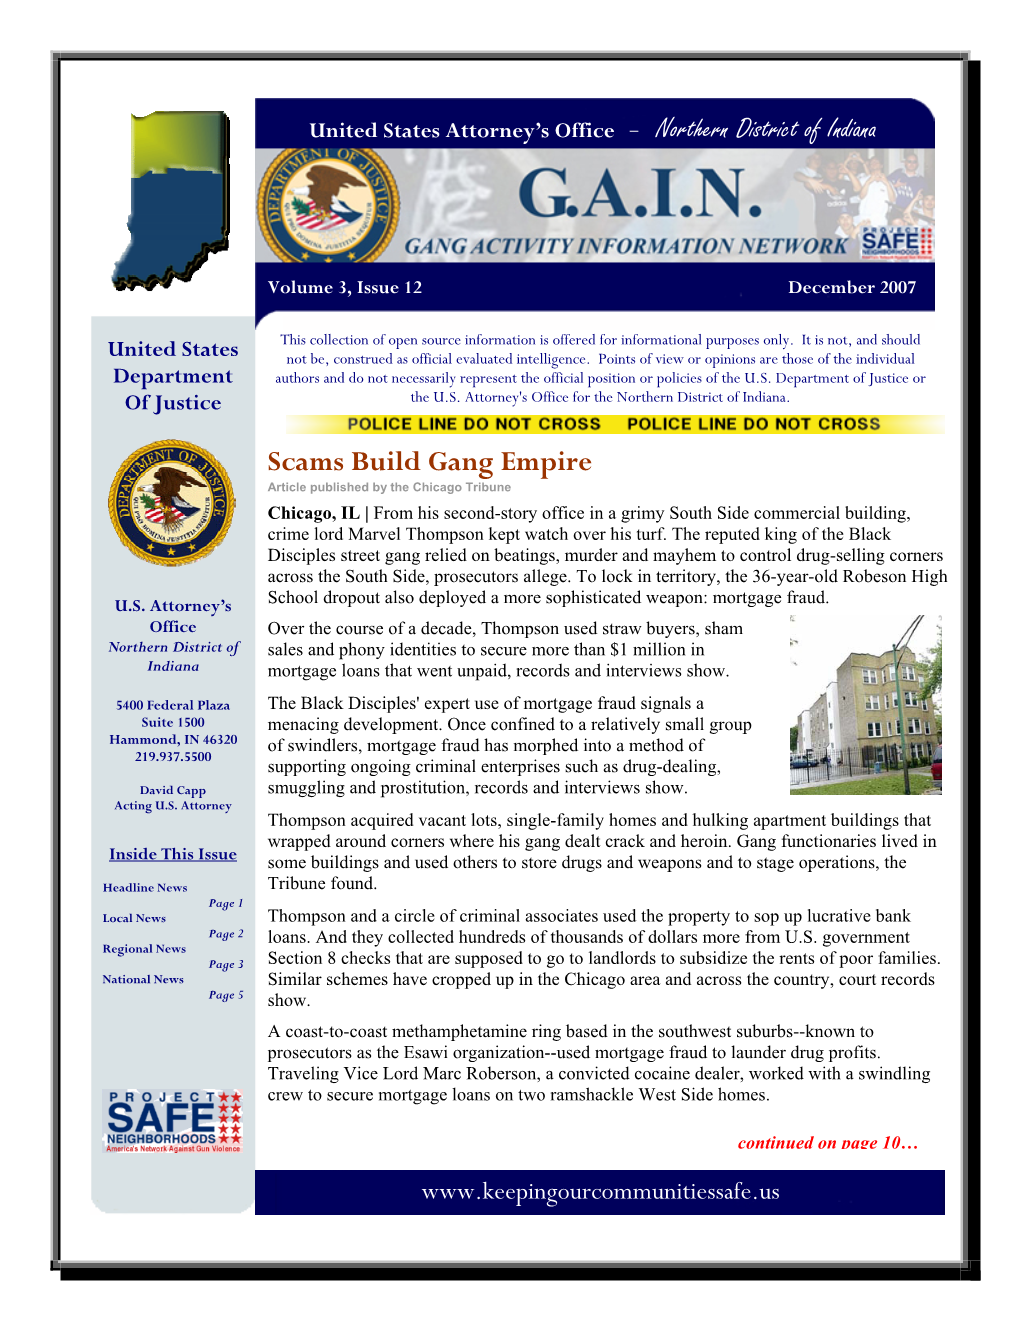 Scams Build Gang Empire Article Published by the Chicago Tribune